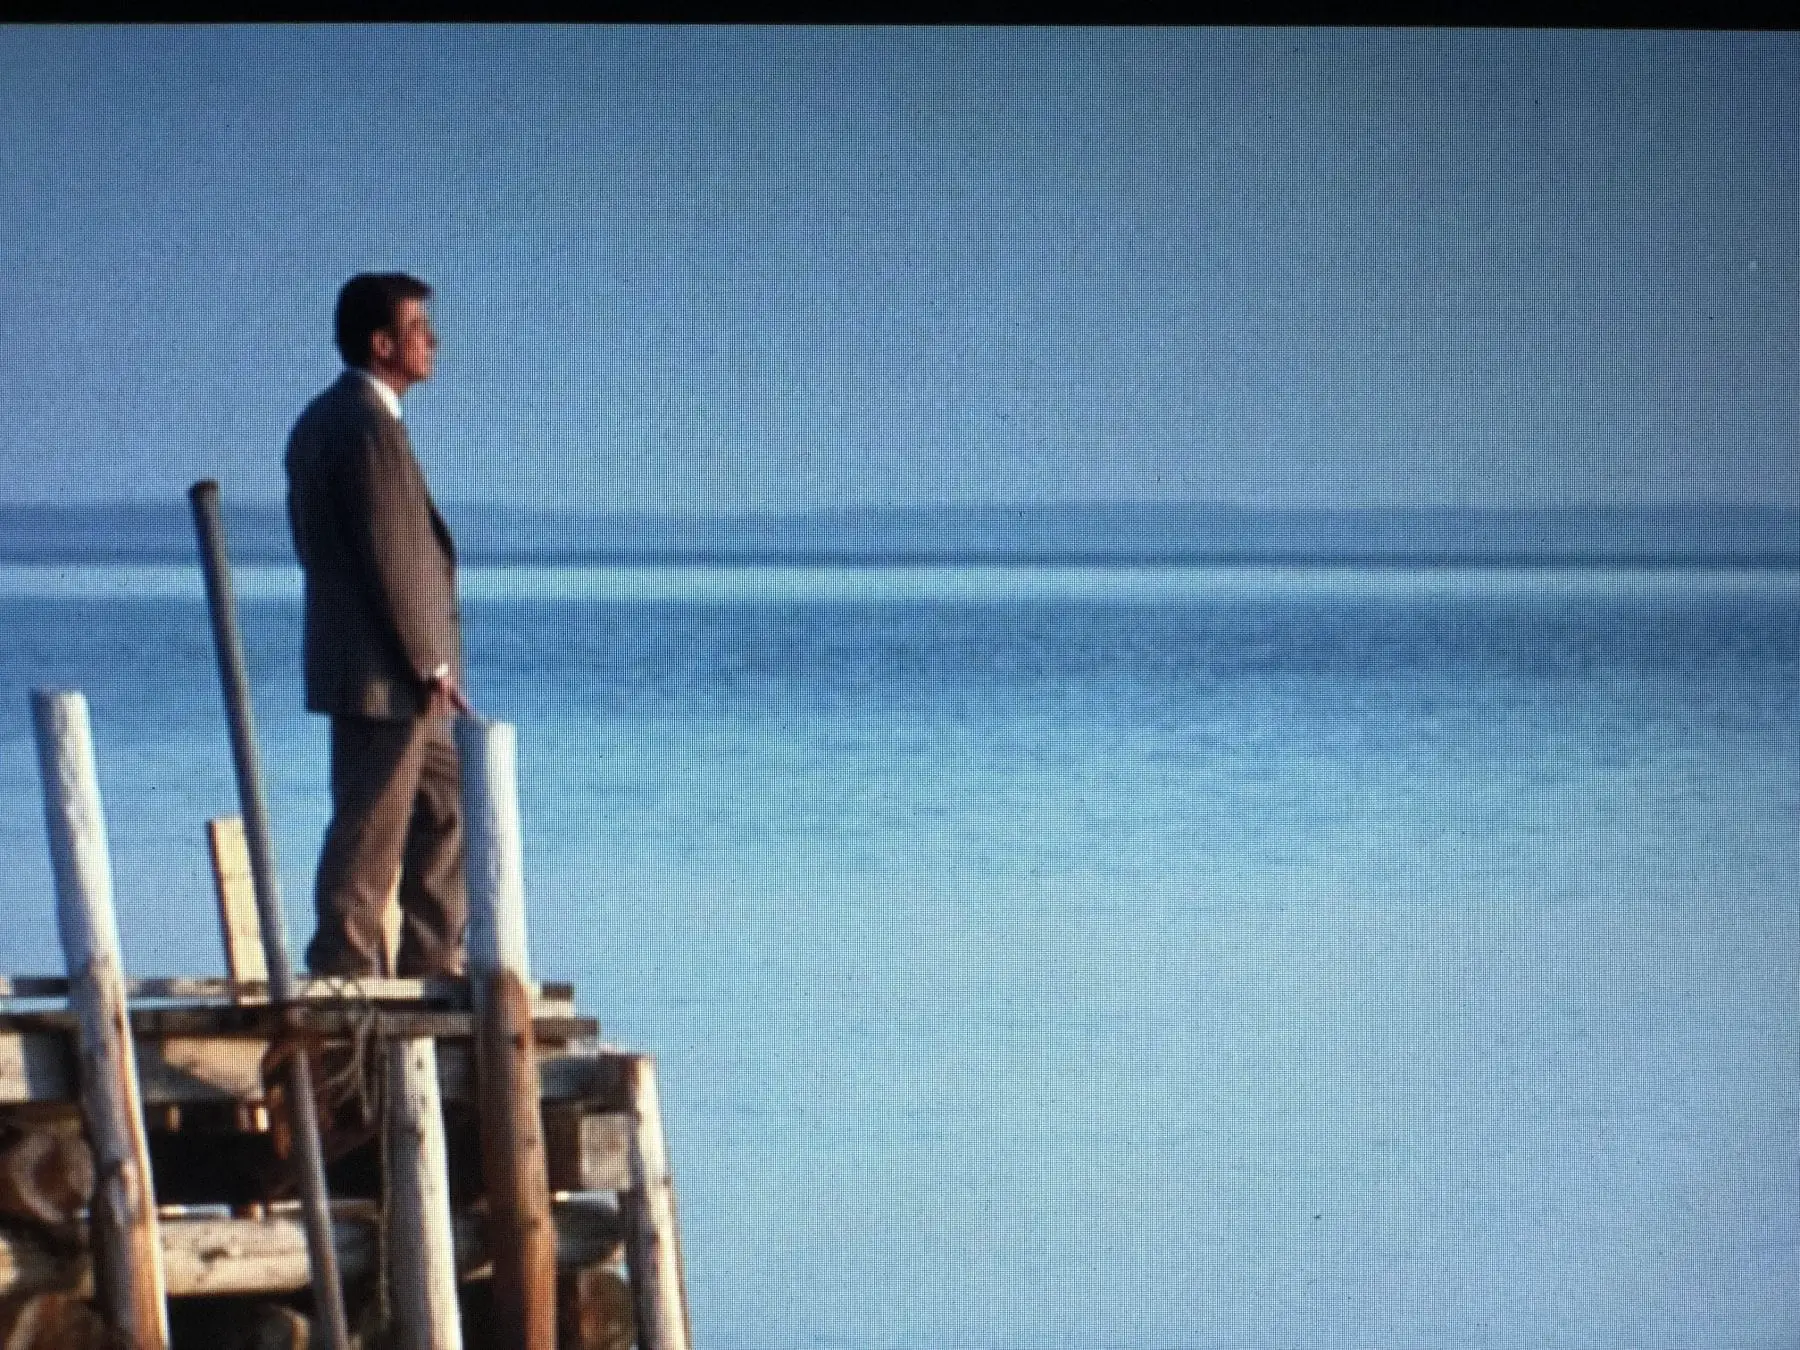 Giles stands on a pier, looking out over the ocean